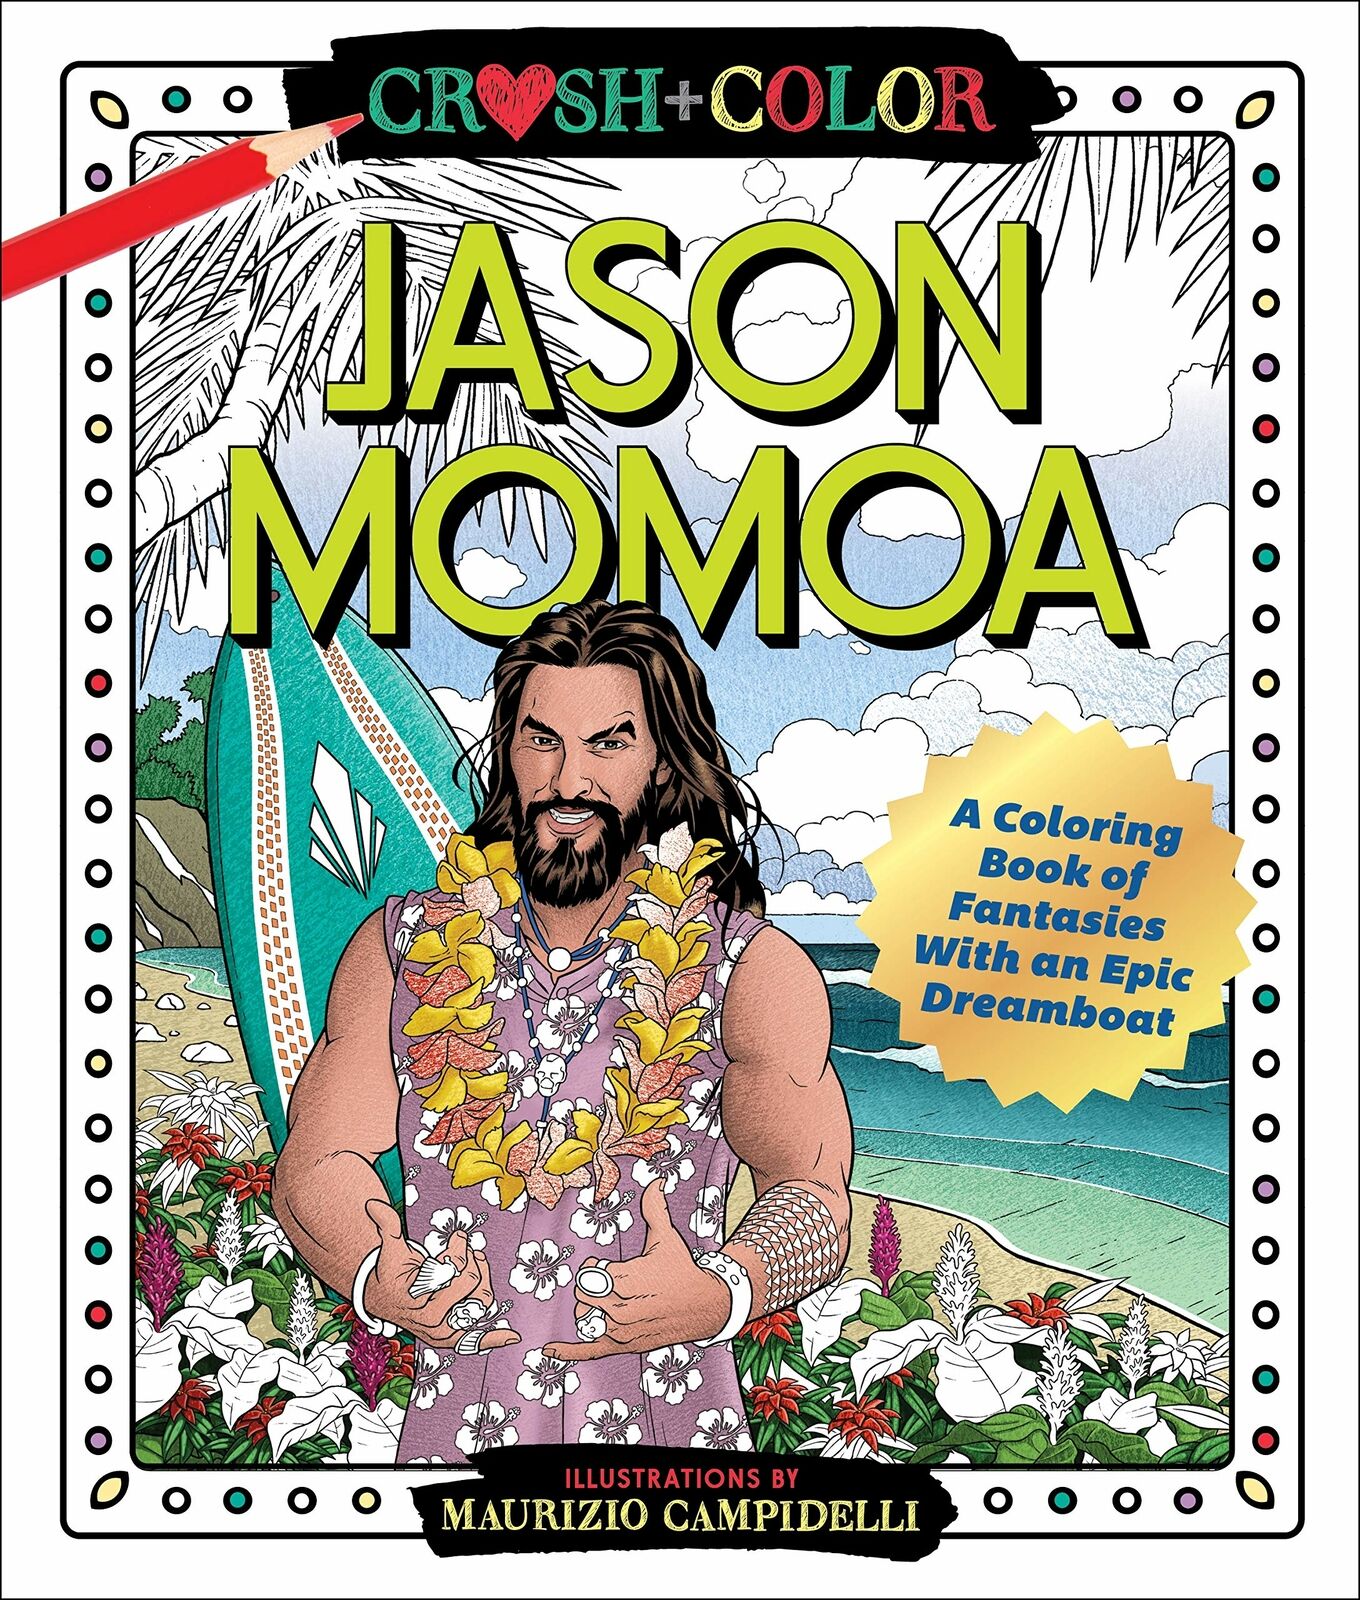 Download CRUSH AND COLOR JASON MOMOA A COLORING BOOK OF FANTASIES ...